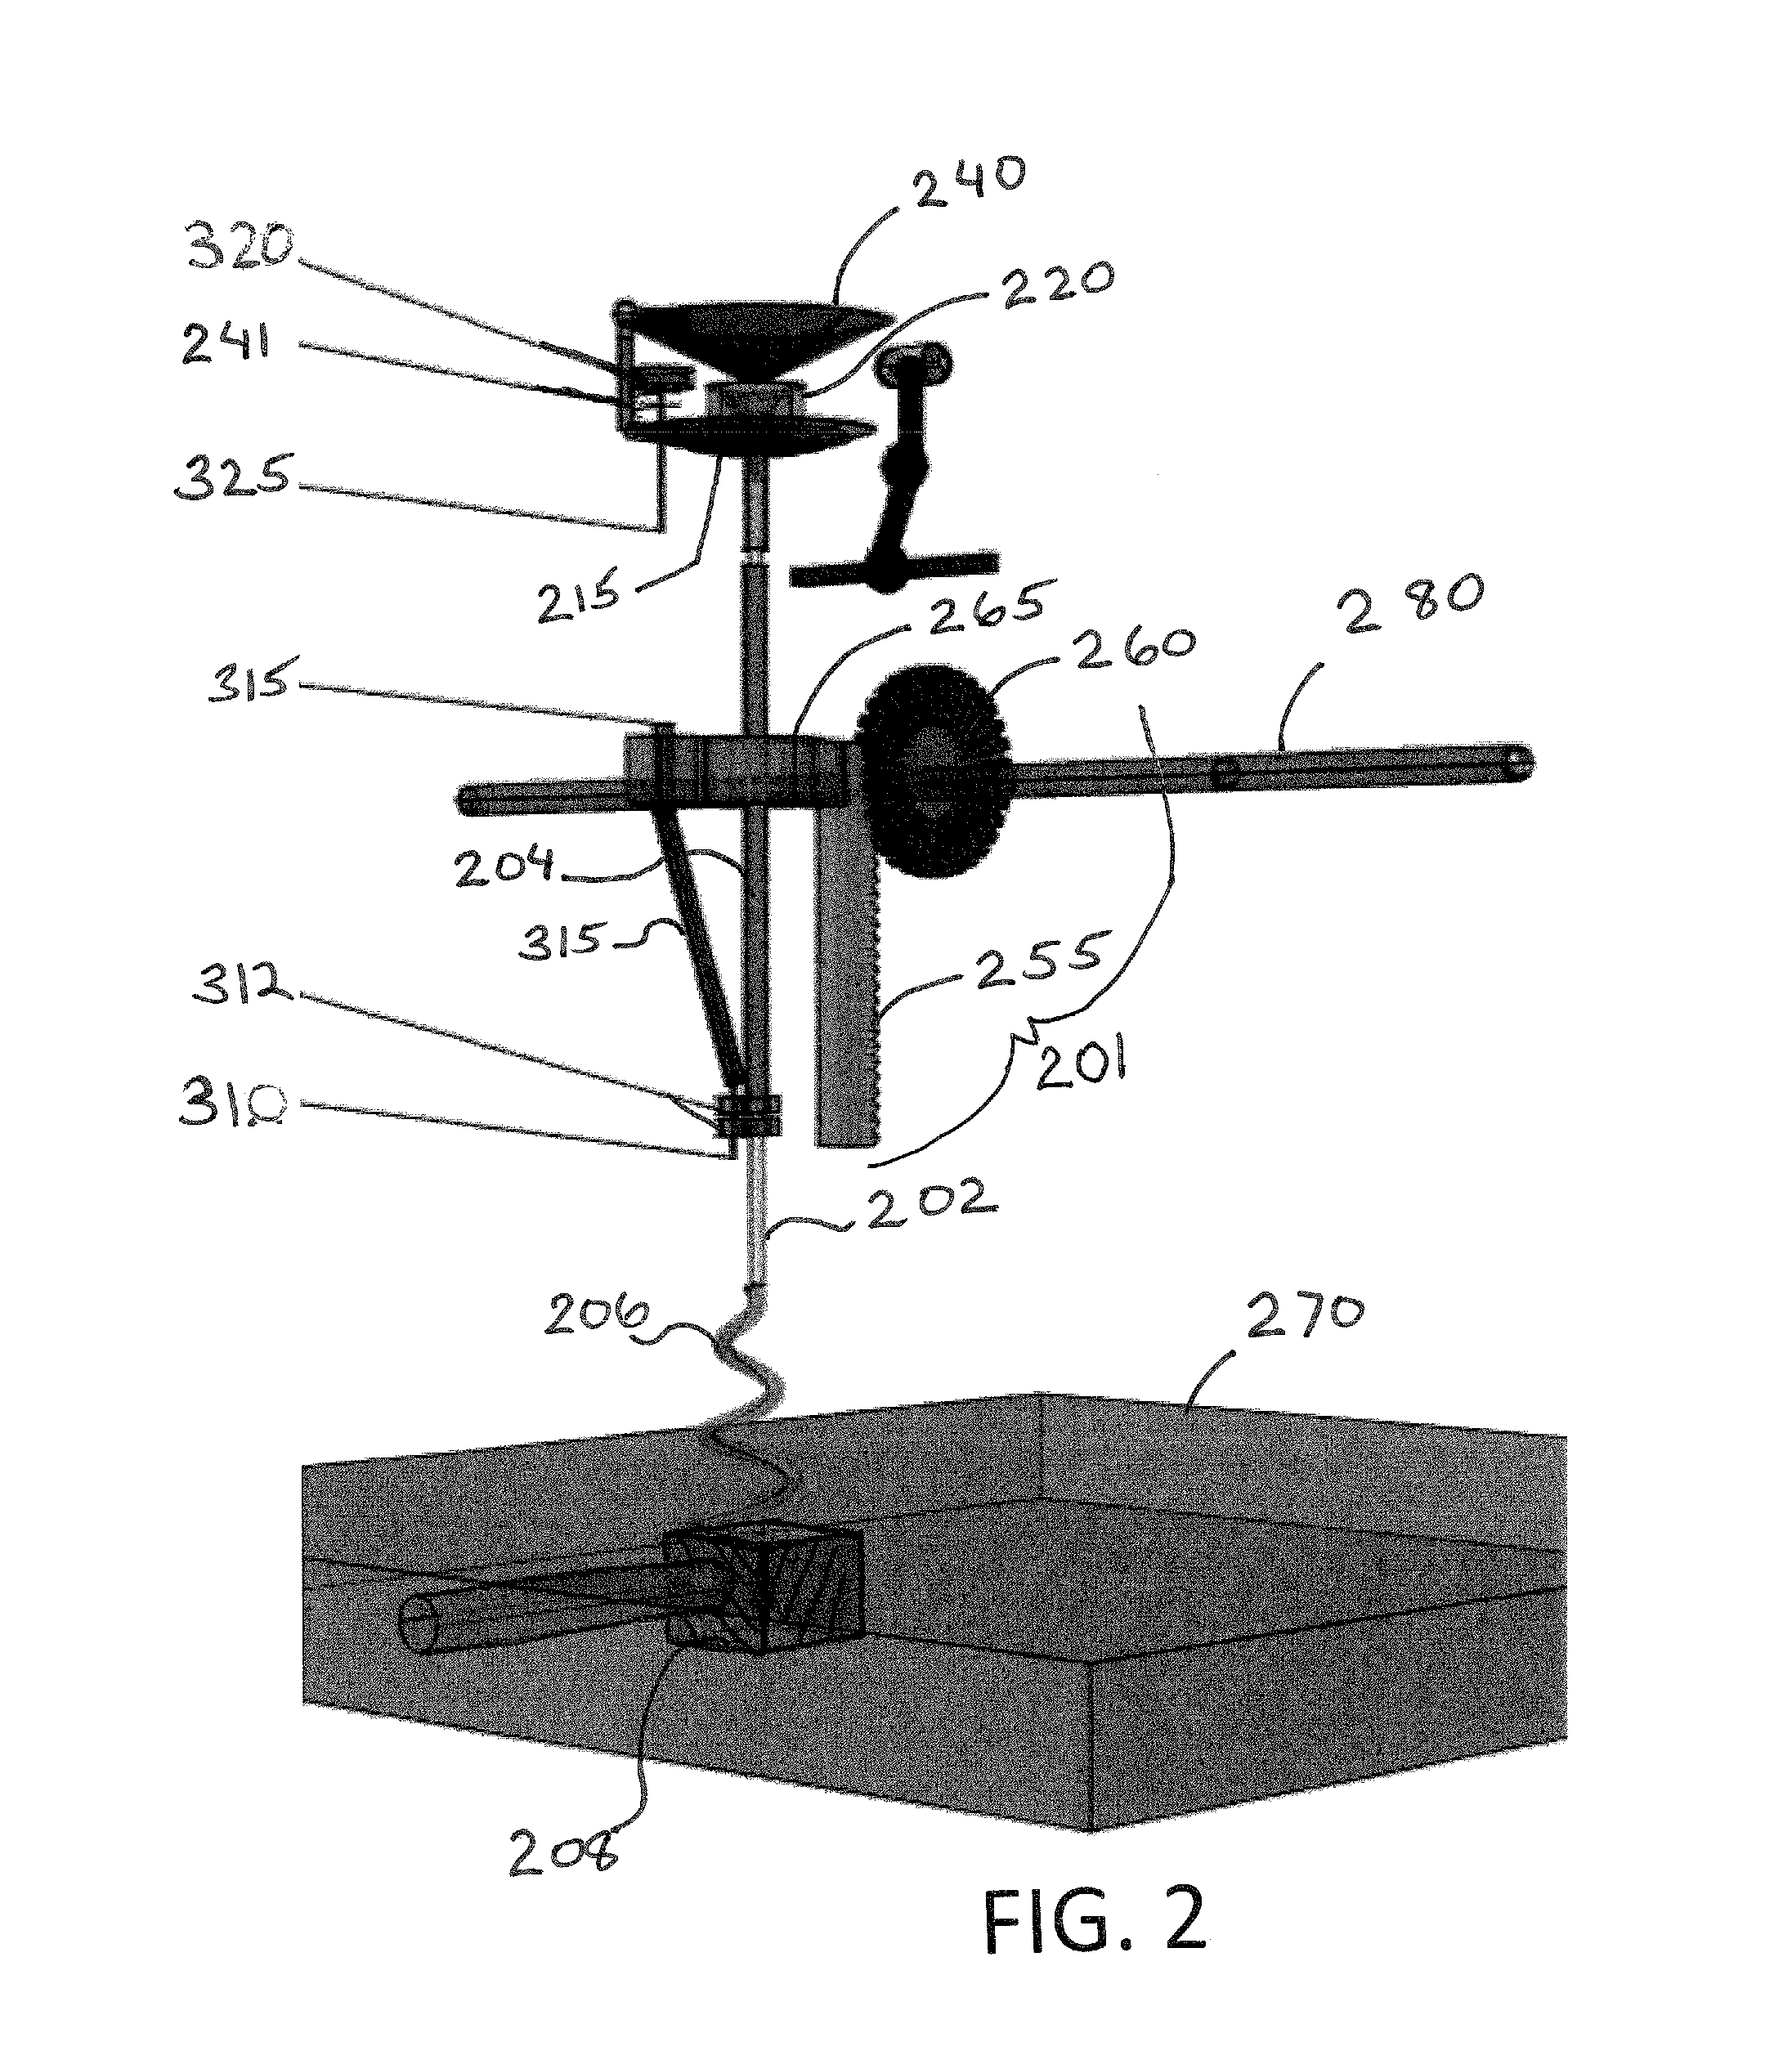 Eye contact lens insertion and removal apparatus